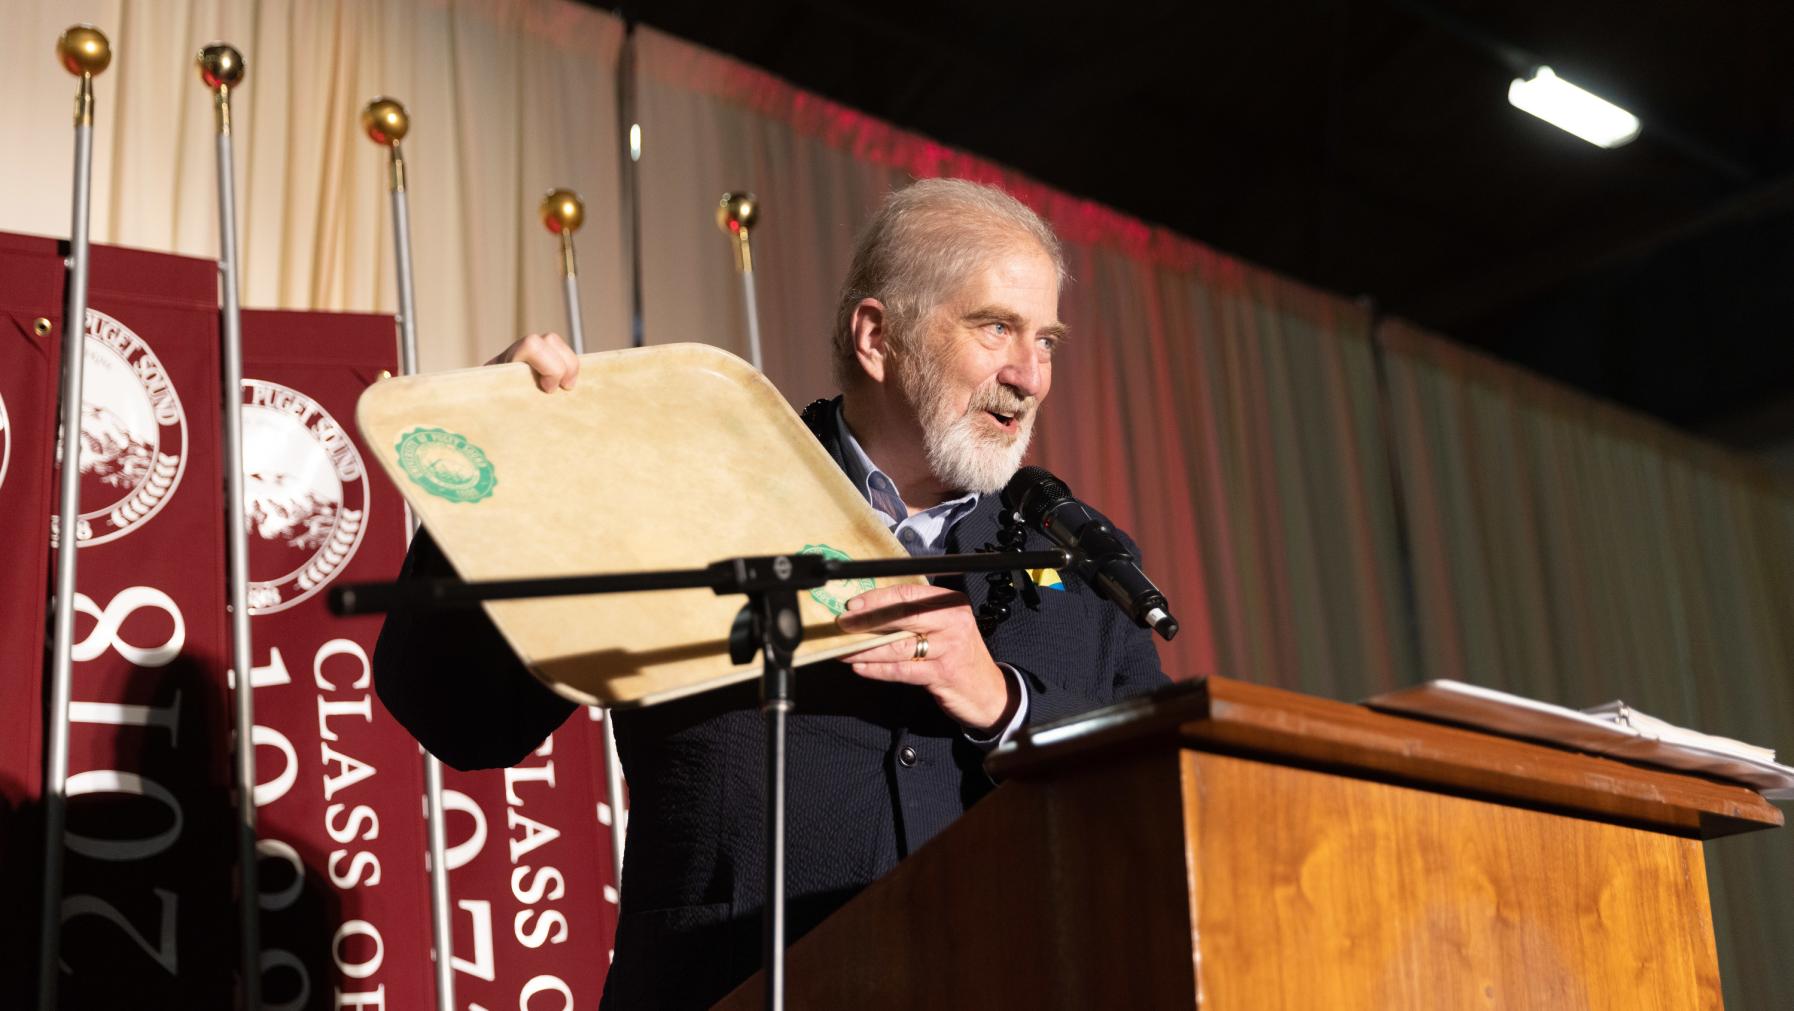 Houston Dougherty with a serving tray from the Diner that he returned at the Alumni Awards ceremony.